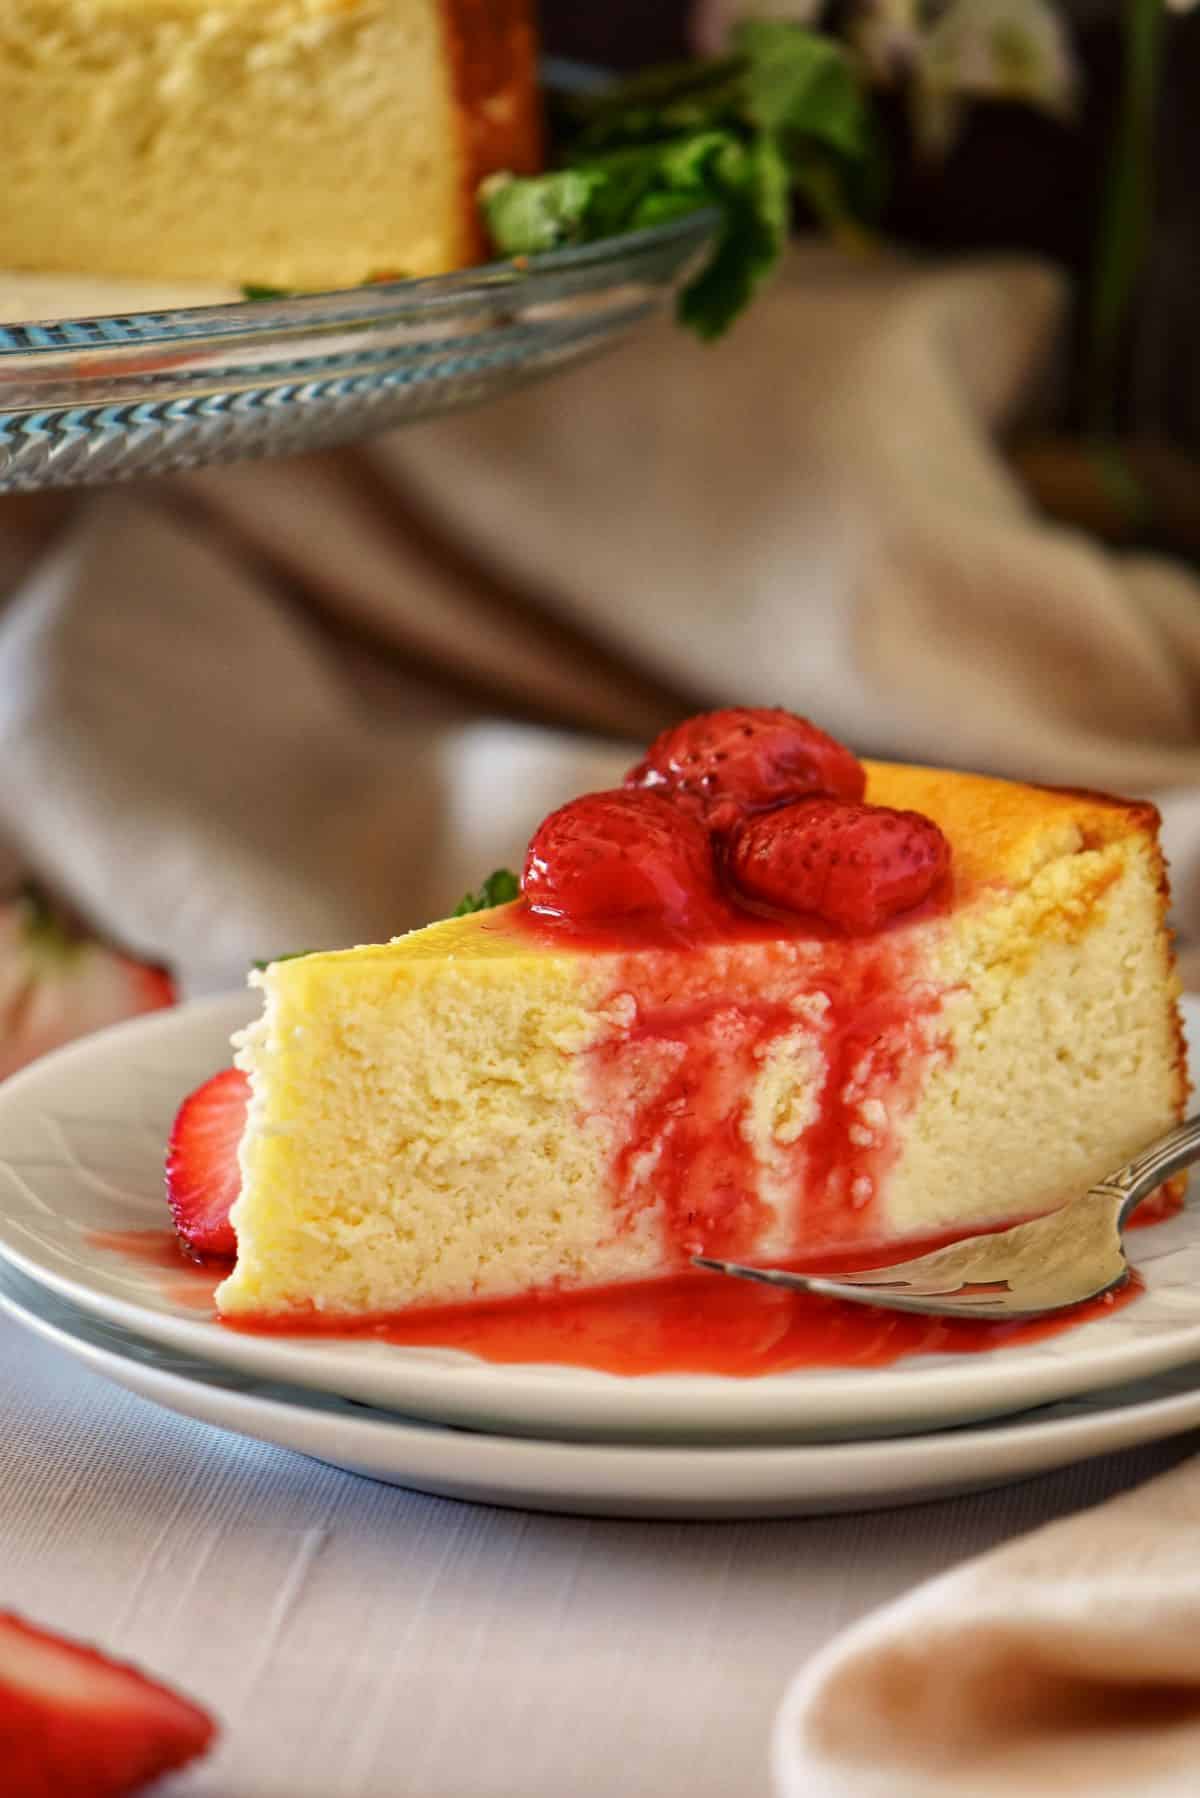 A slice of ricotta cheesecake garnished with roasted strawberries on a white plate.